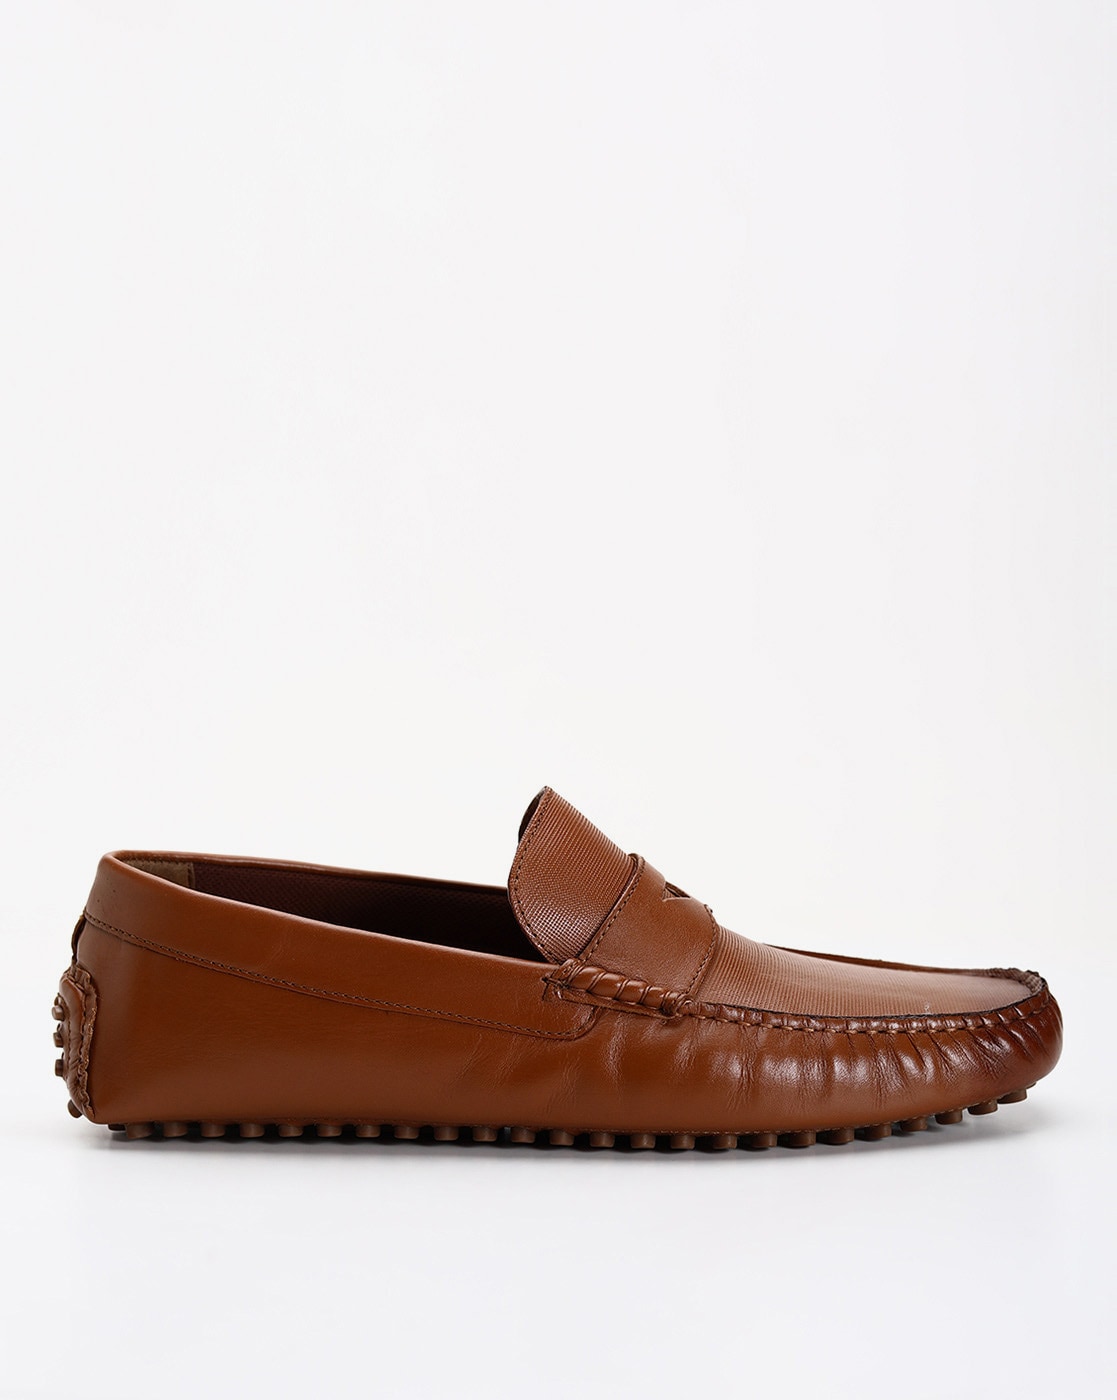 red tape men's leather loafers and moccasins